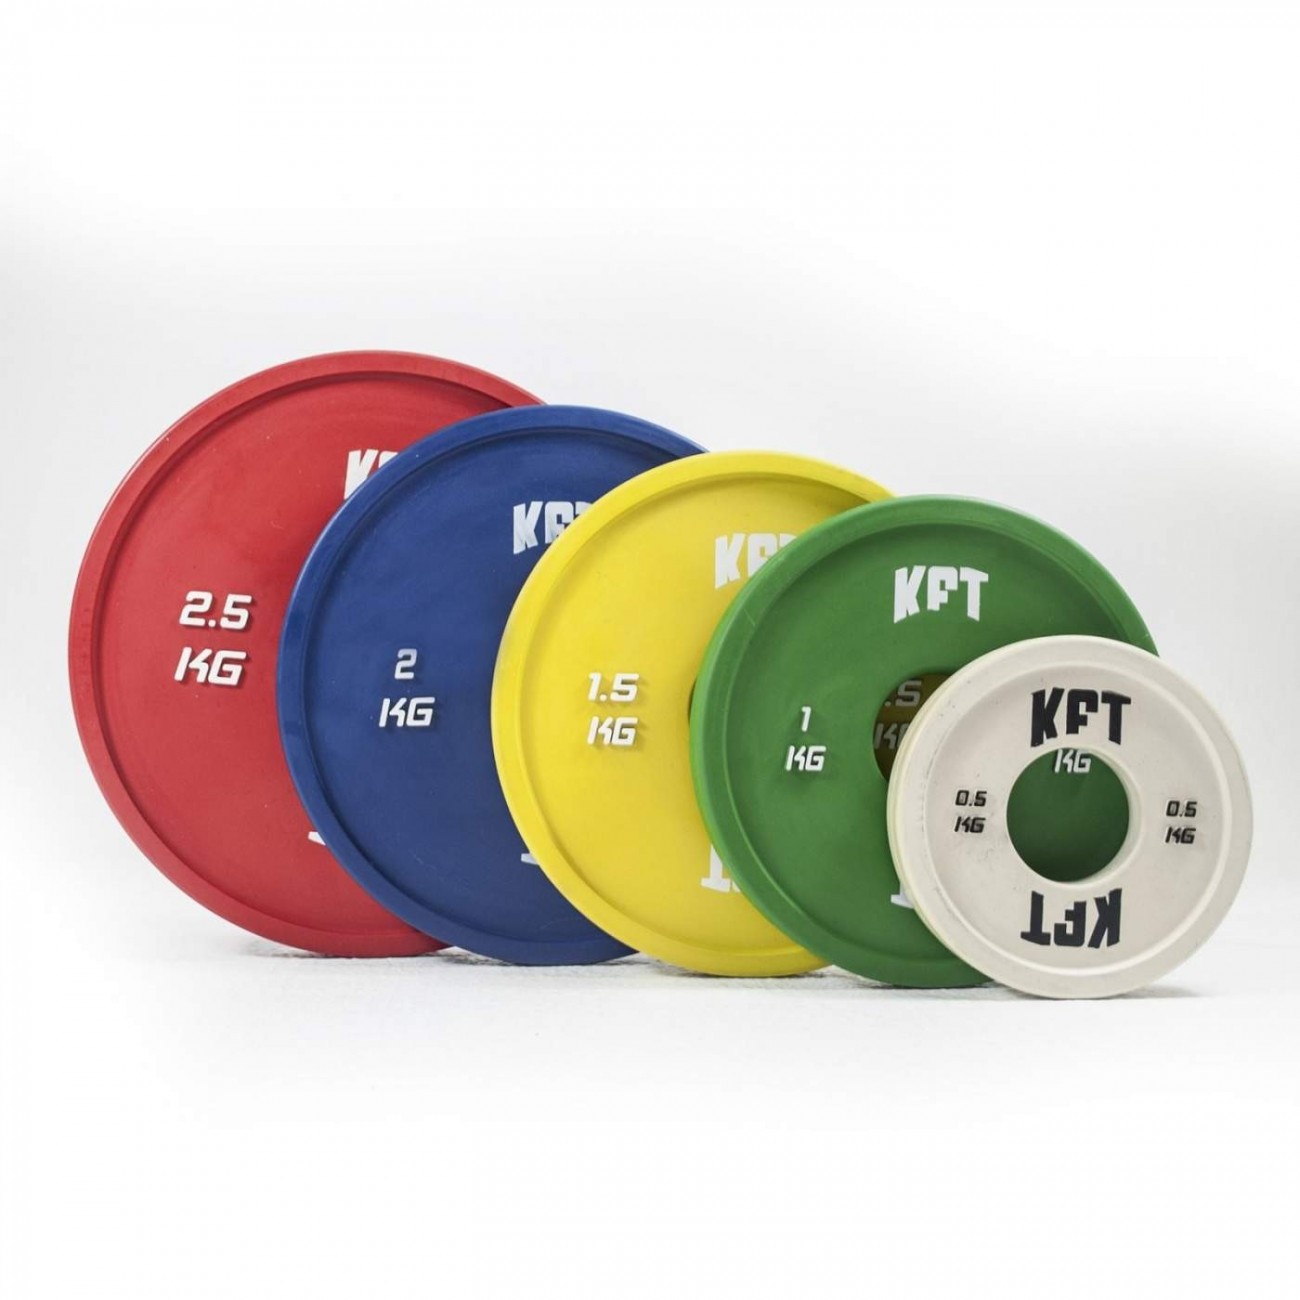 Fractional discs different weights